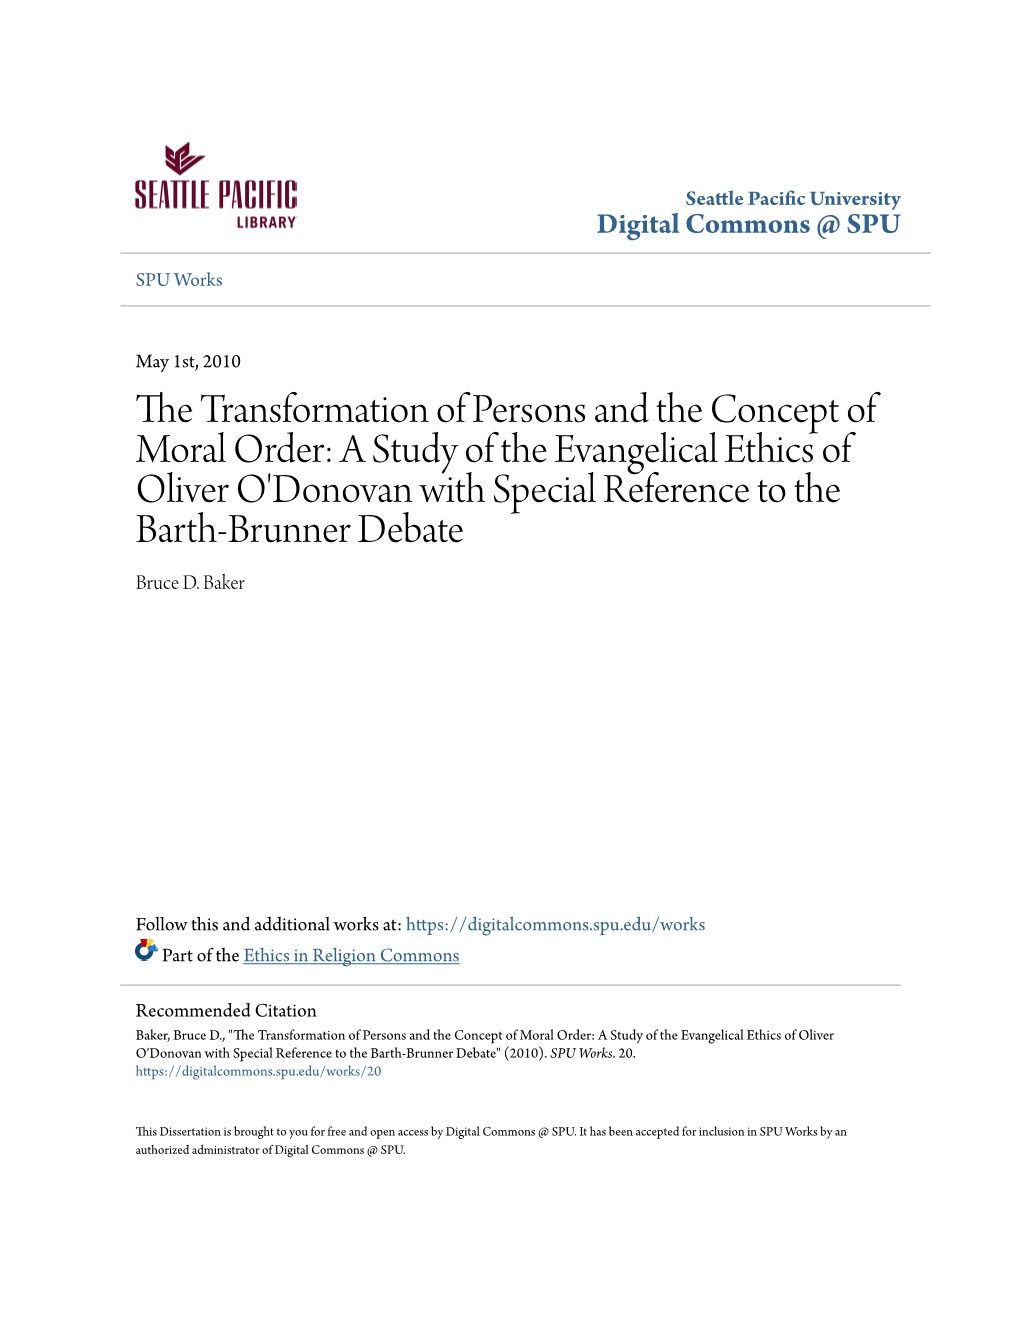 The Transformation of Persons and the Concept of Moral Order: a Study